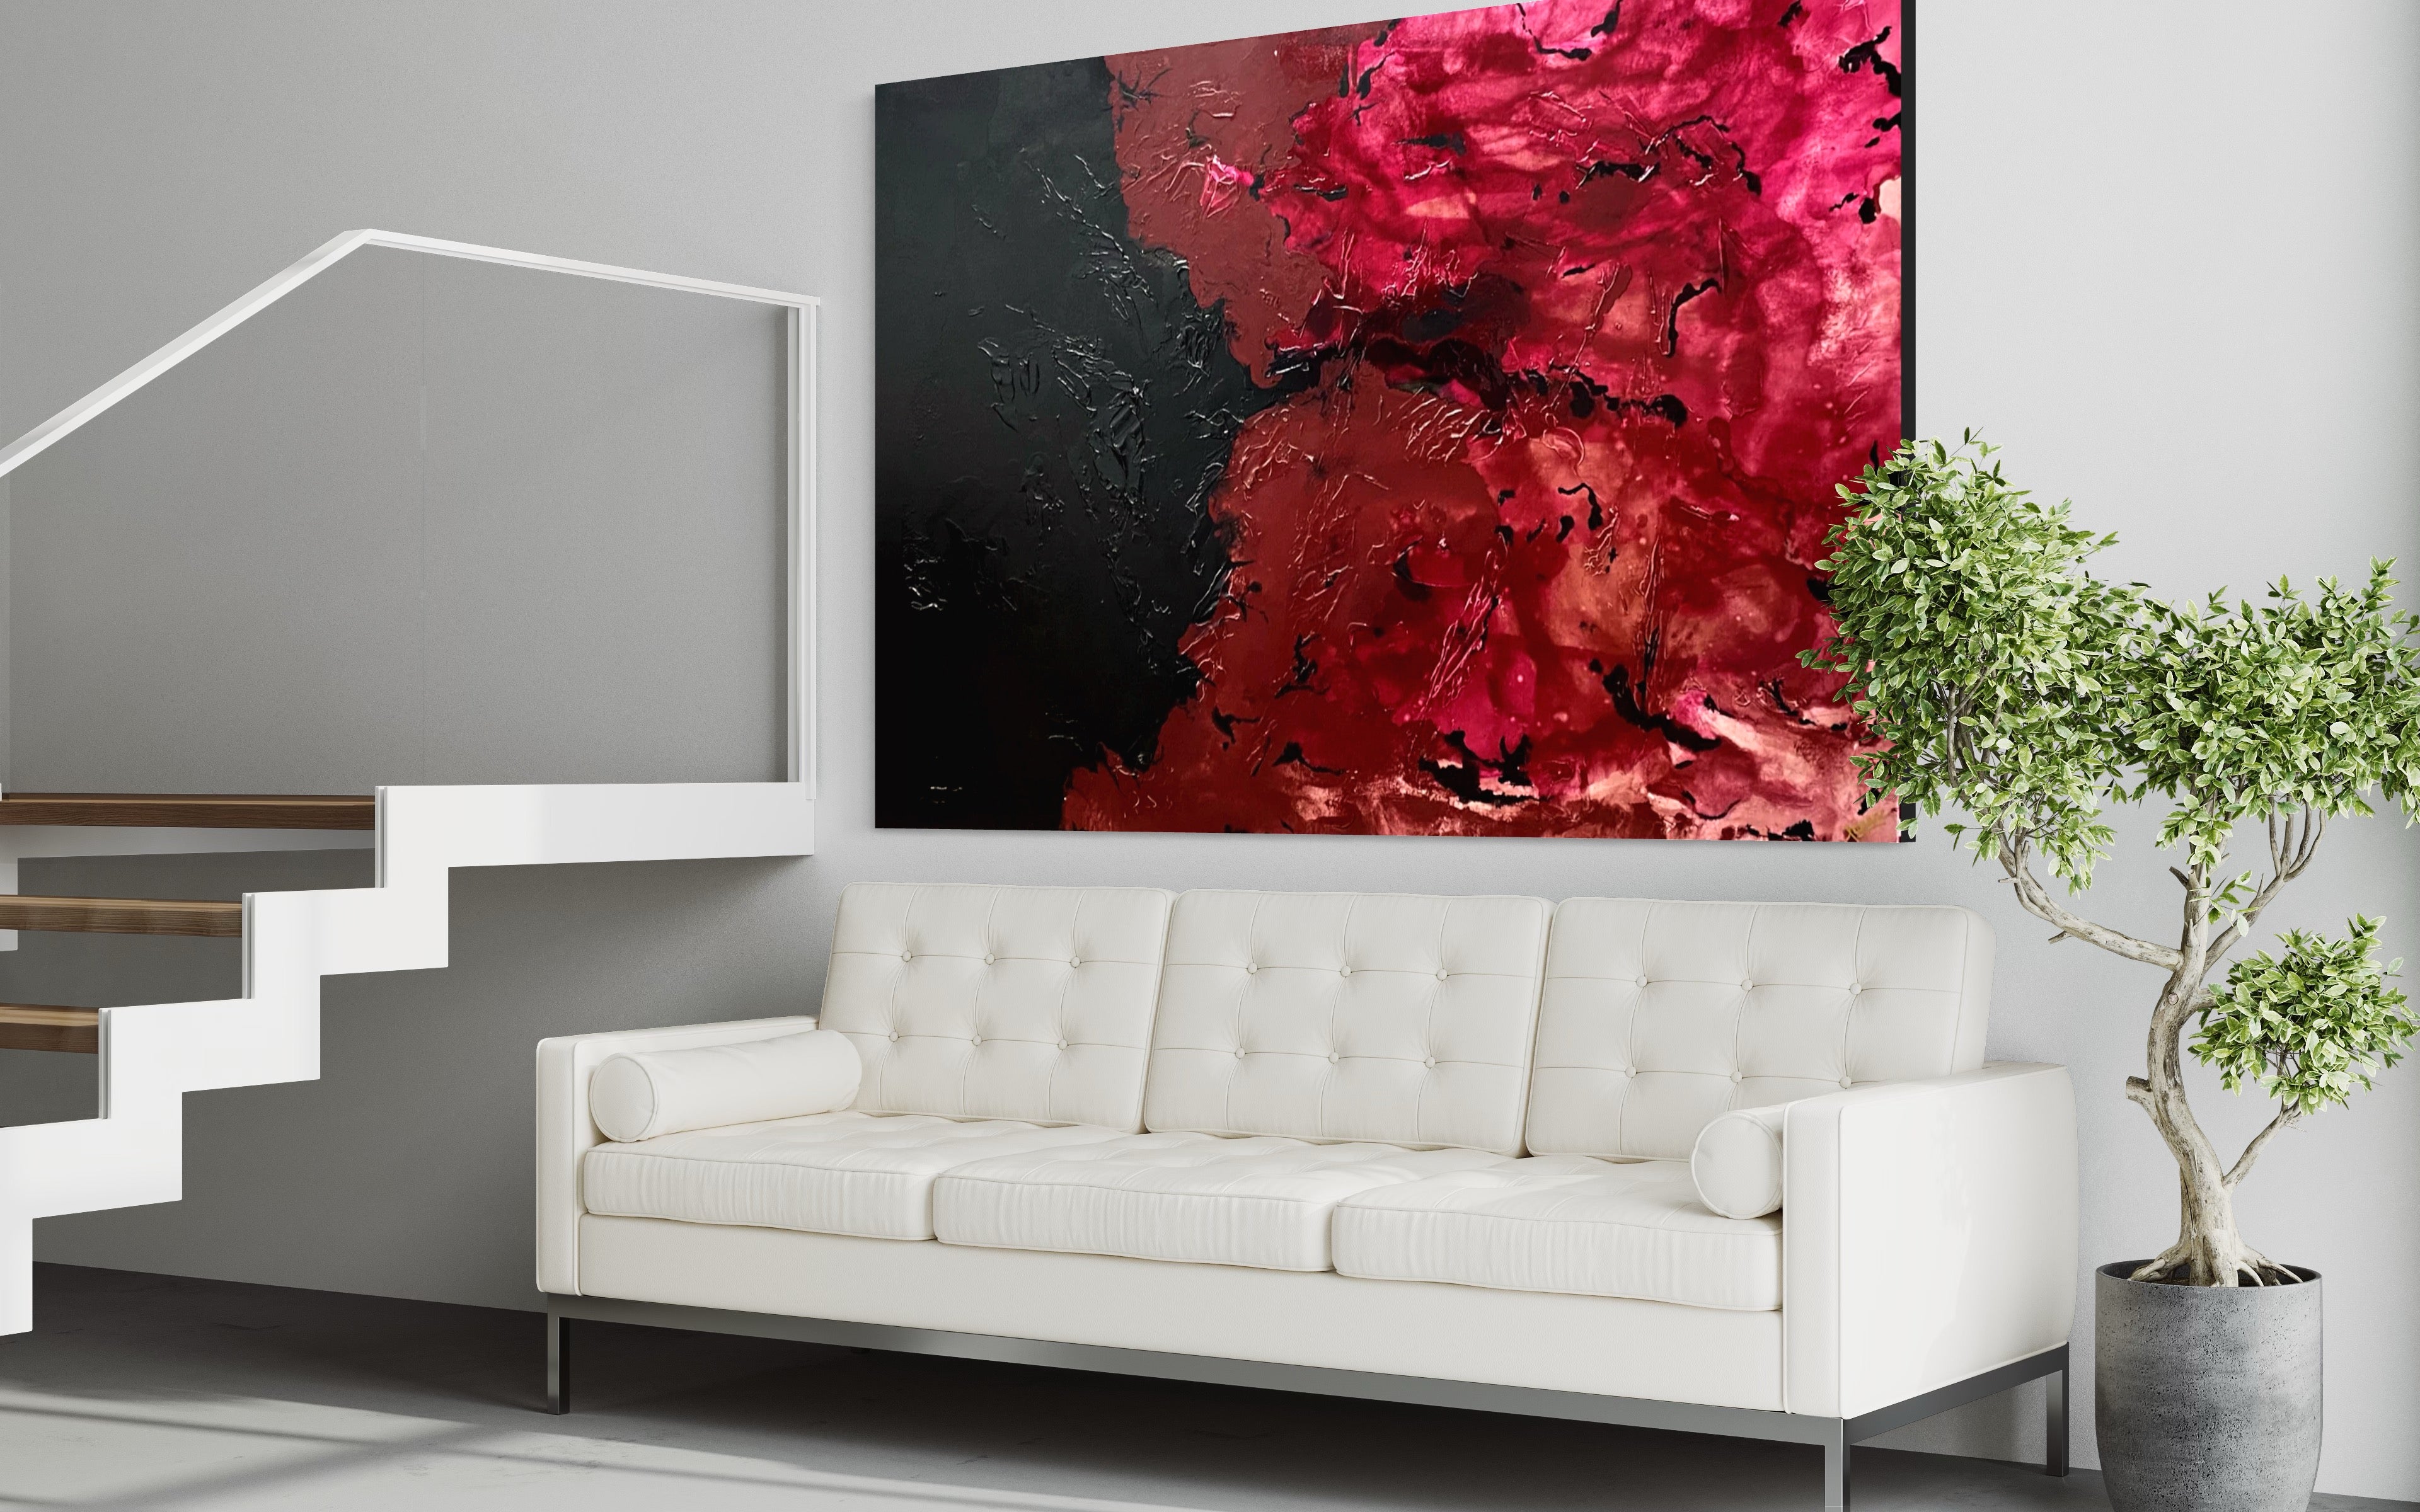 Red Violet 121.8 cm x 182.8 cm Violet Textured Abstract Painting